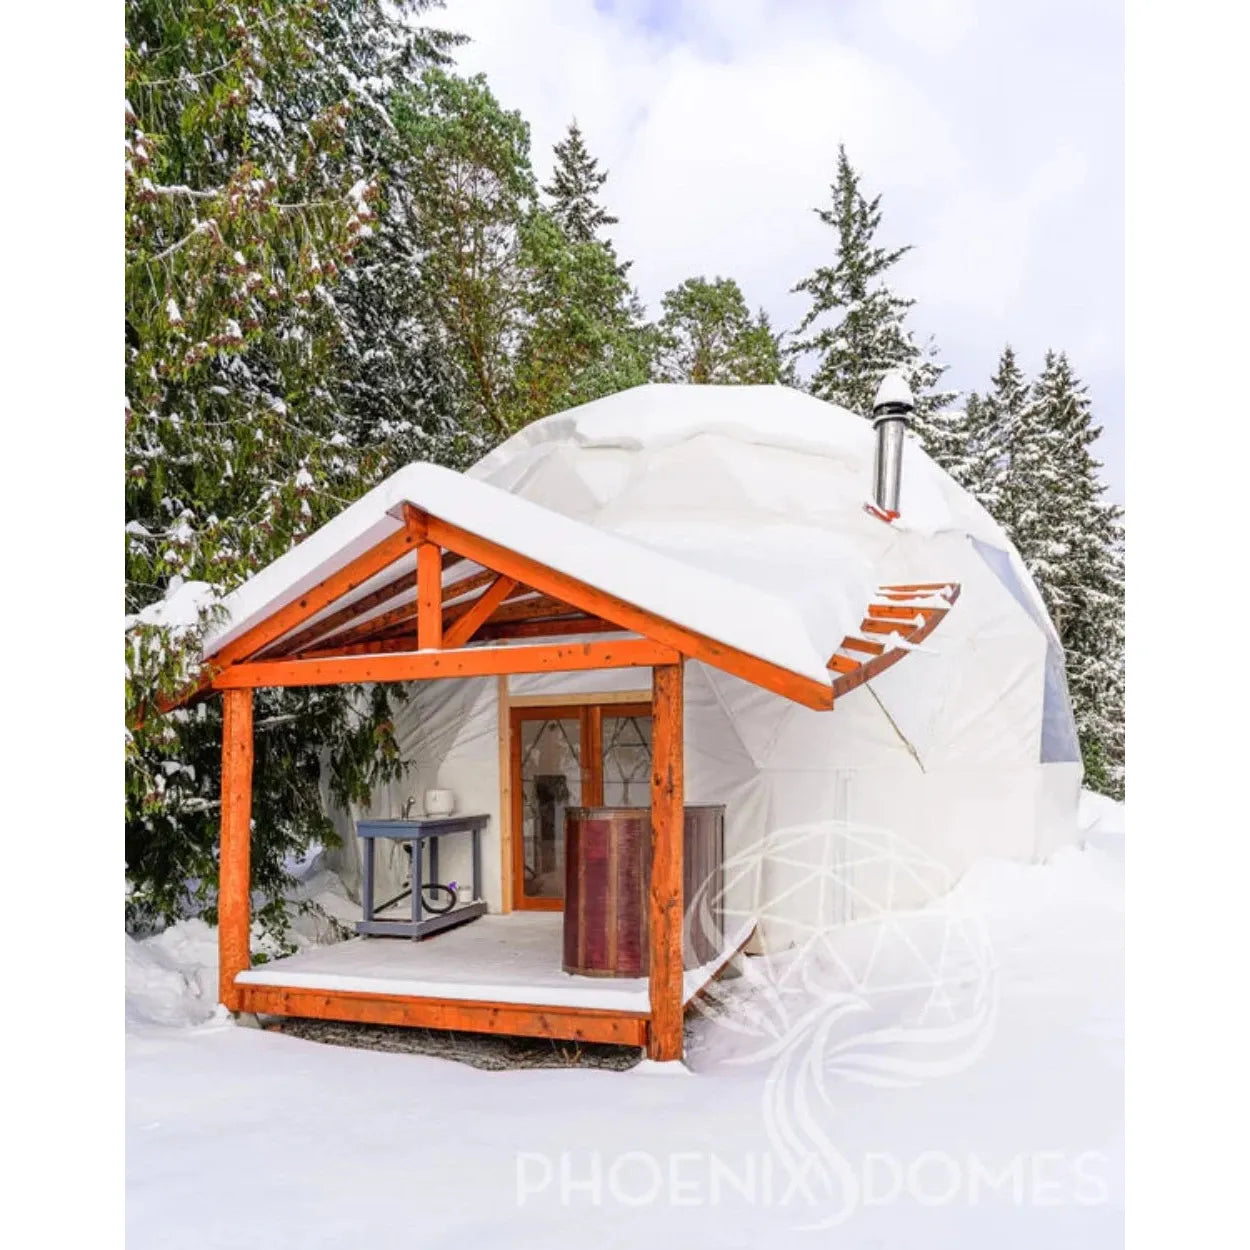 4-season-deluxe-glamping-yoga-package-dome-30-9m-313